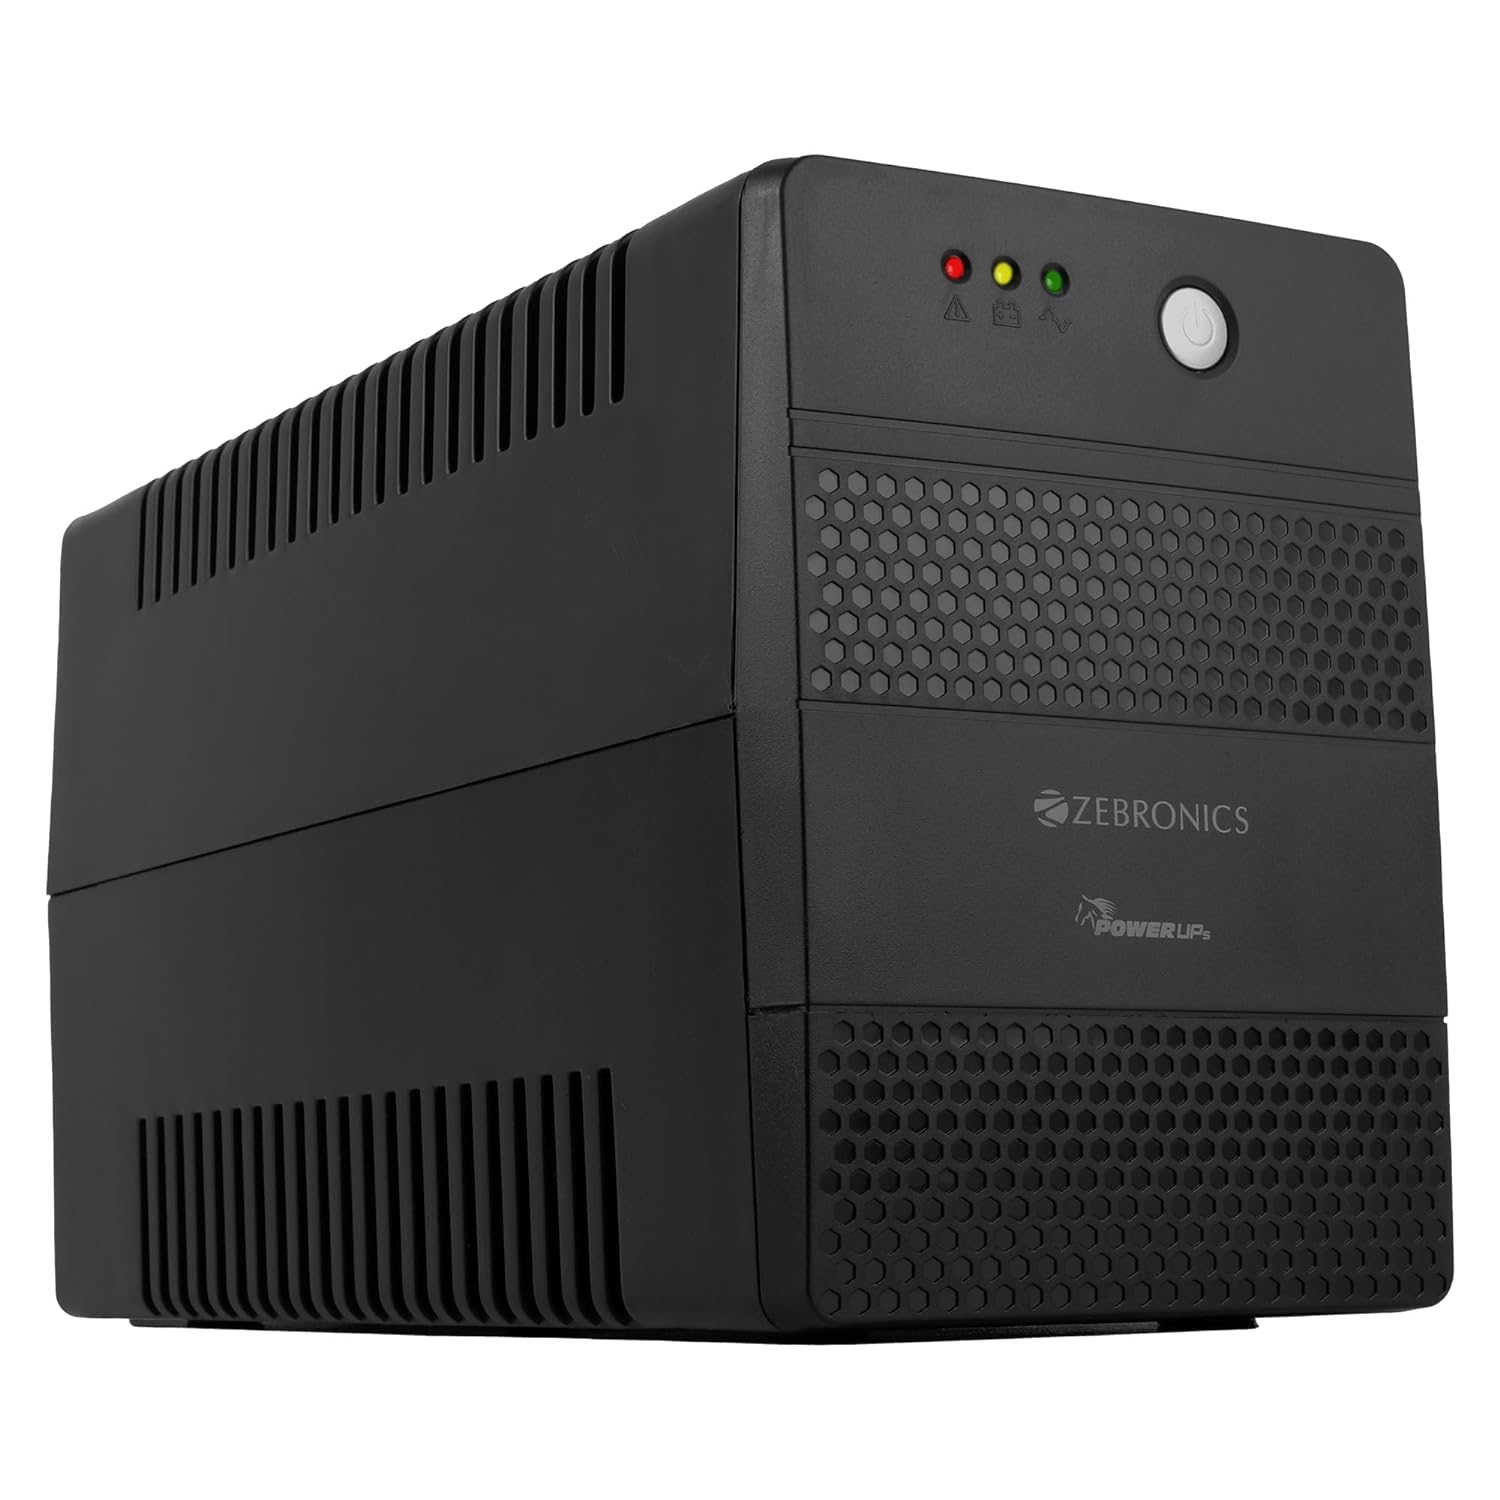 ZEBRONICS U1205 Microcontroller Based UPS | Up-to 1000VA | 600W, Double Boost, Automatic Voltage Regulation, Overload Protection, Auto Restart